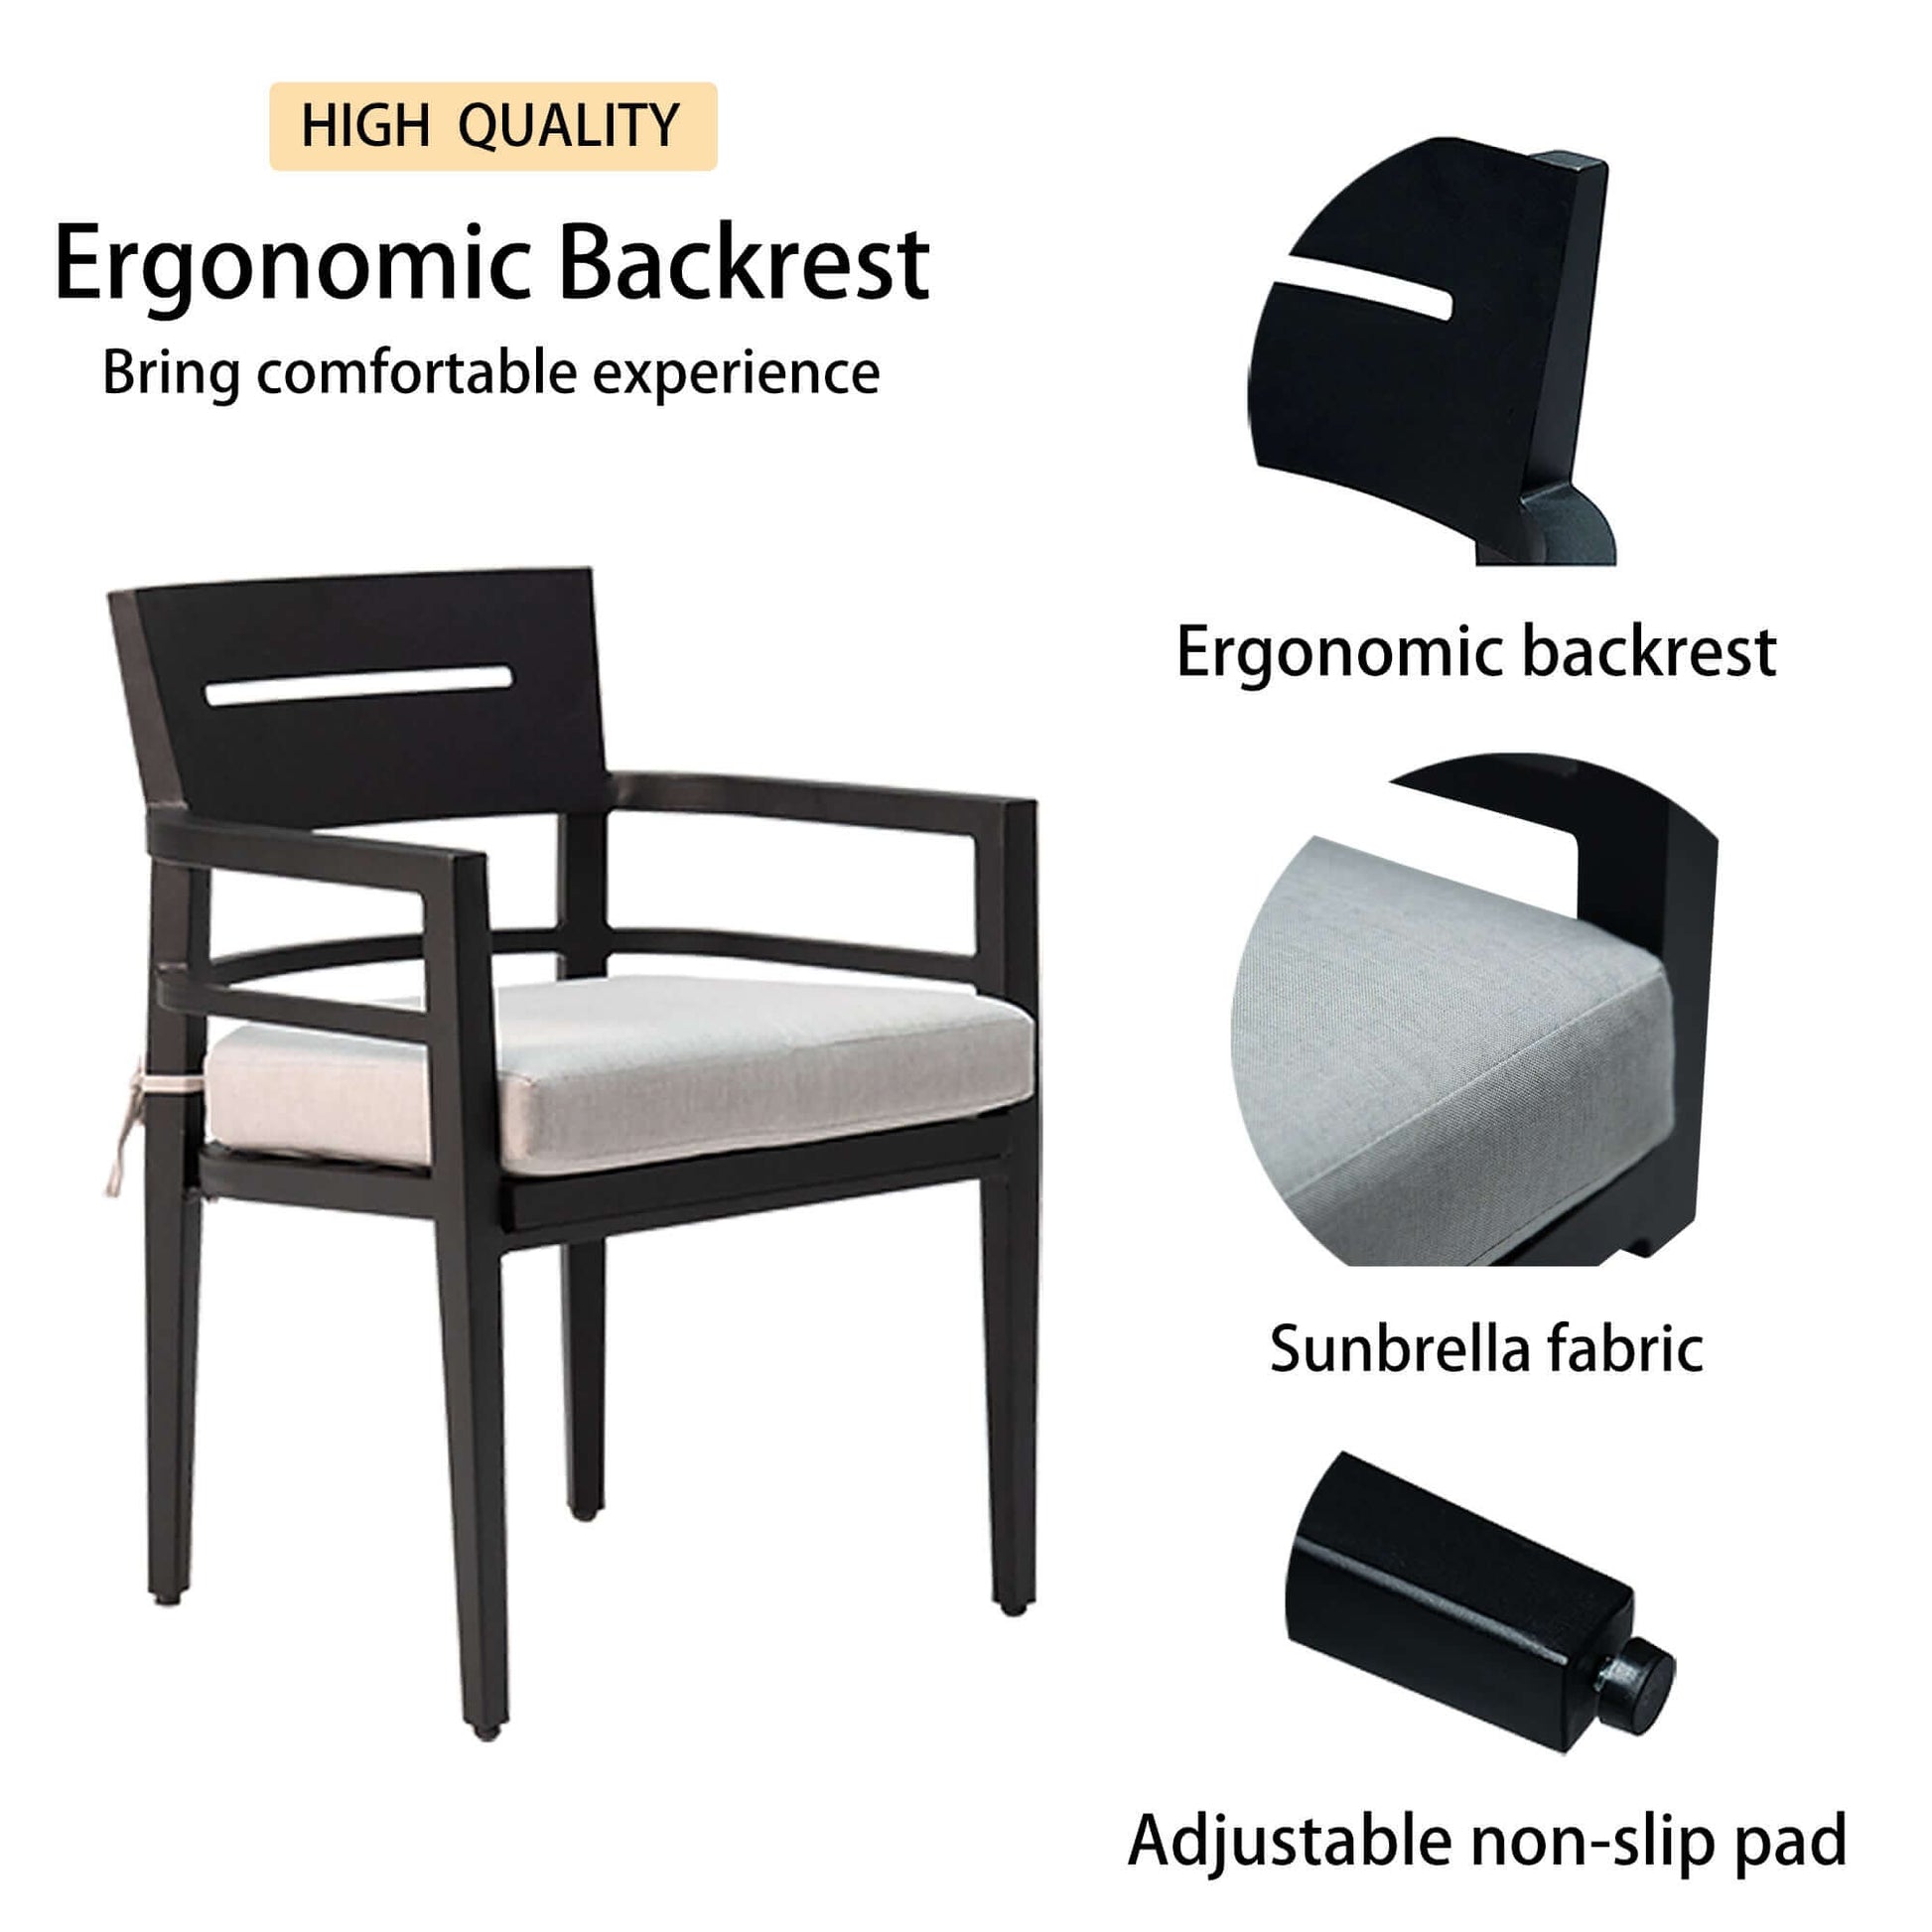 Aluminum patio dining chair with ergonomic backrest, Sunbrella fabric cushion, and adjustable non-slip pad for comfort and durability.